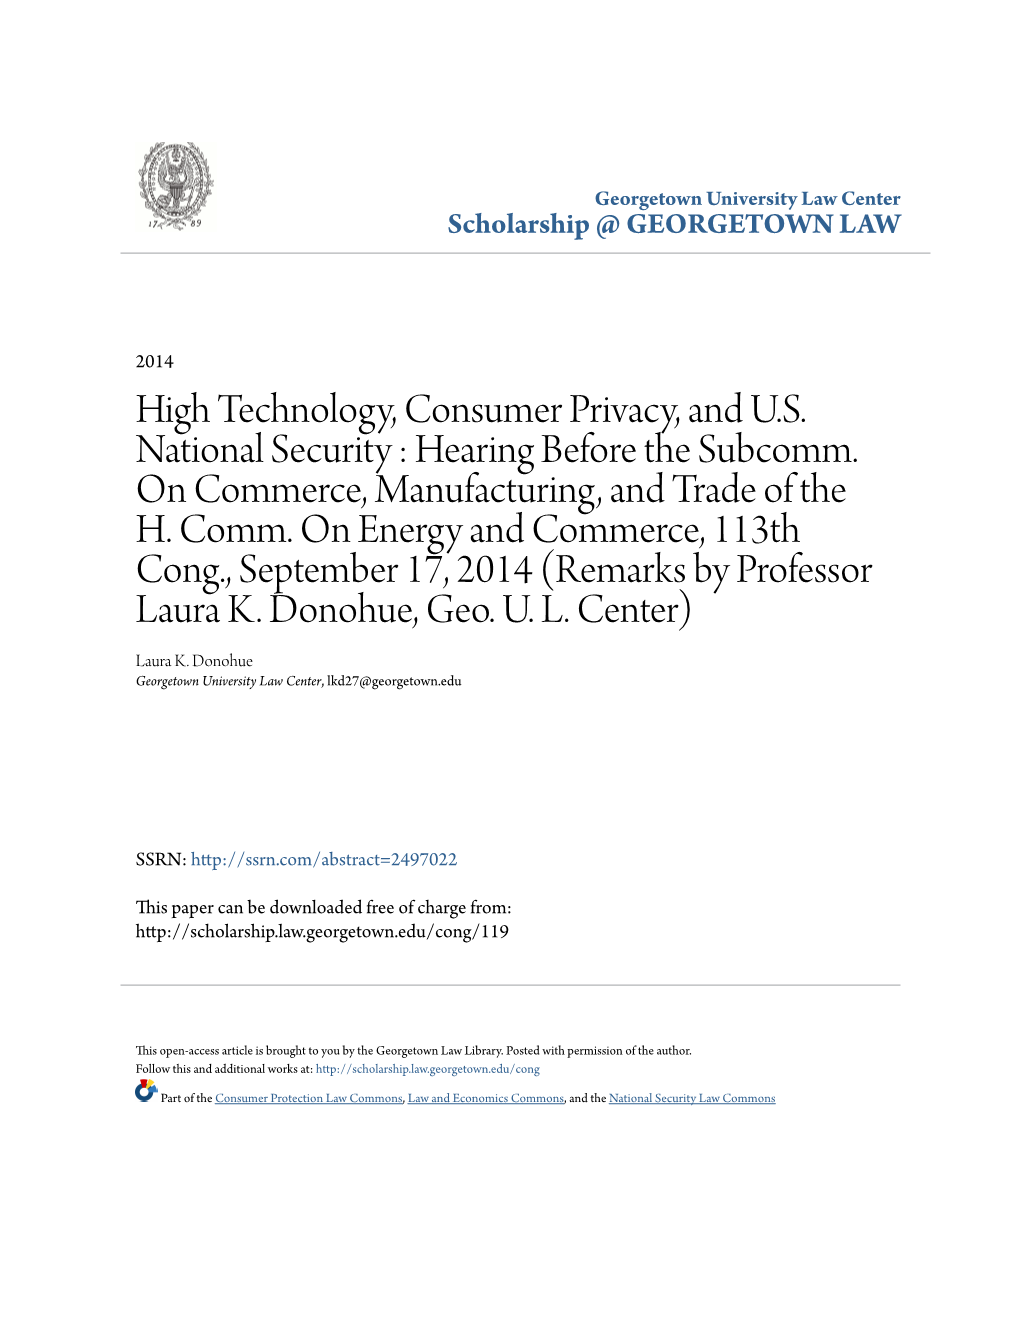 High Technology, Consumer Privacy, and U.S. National Security : Hearing Before the Subcomm